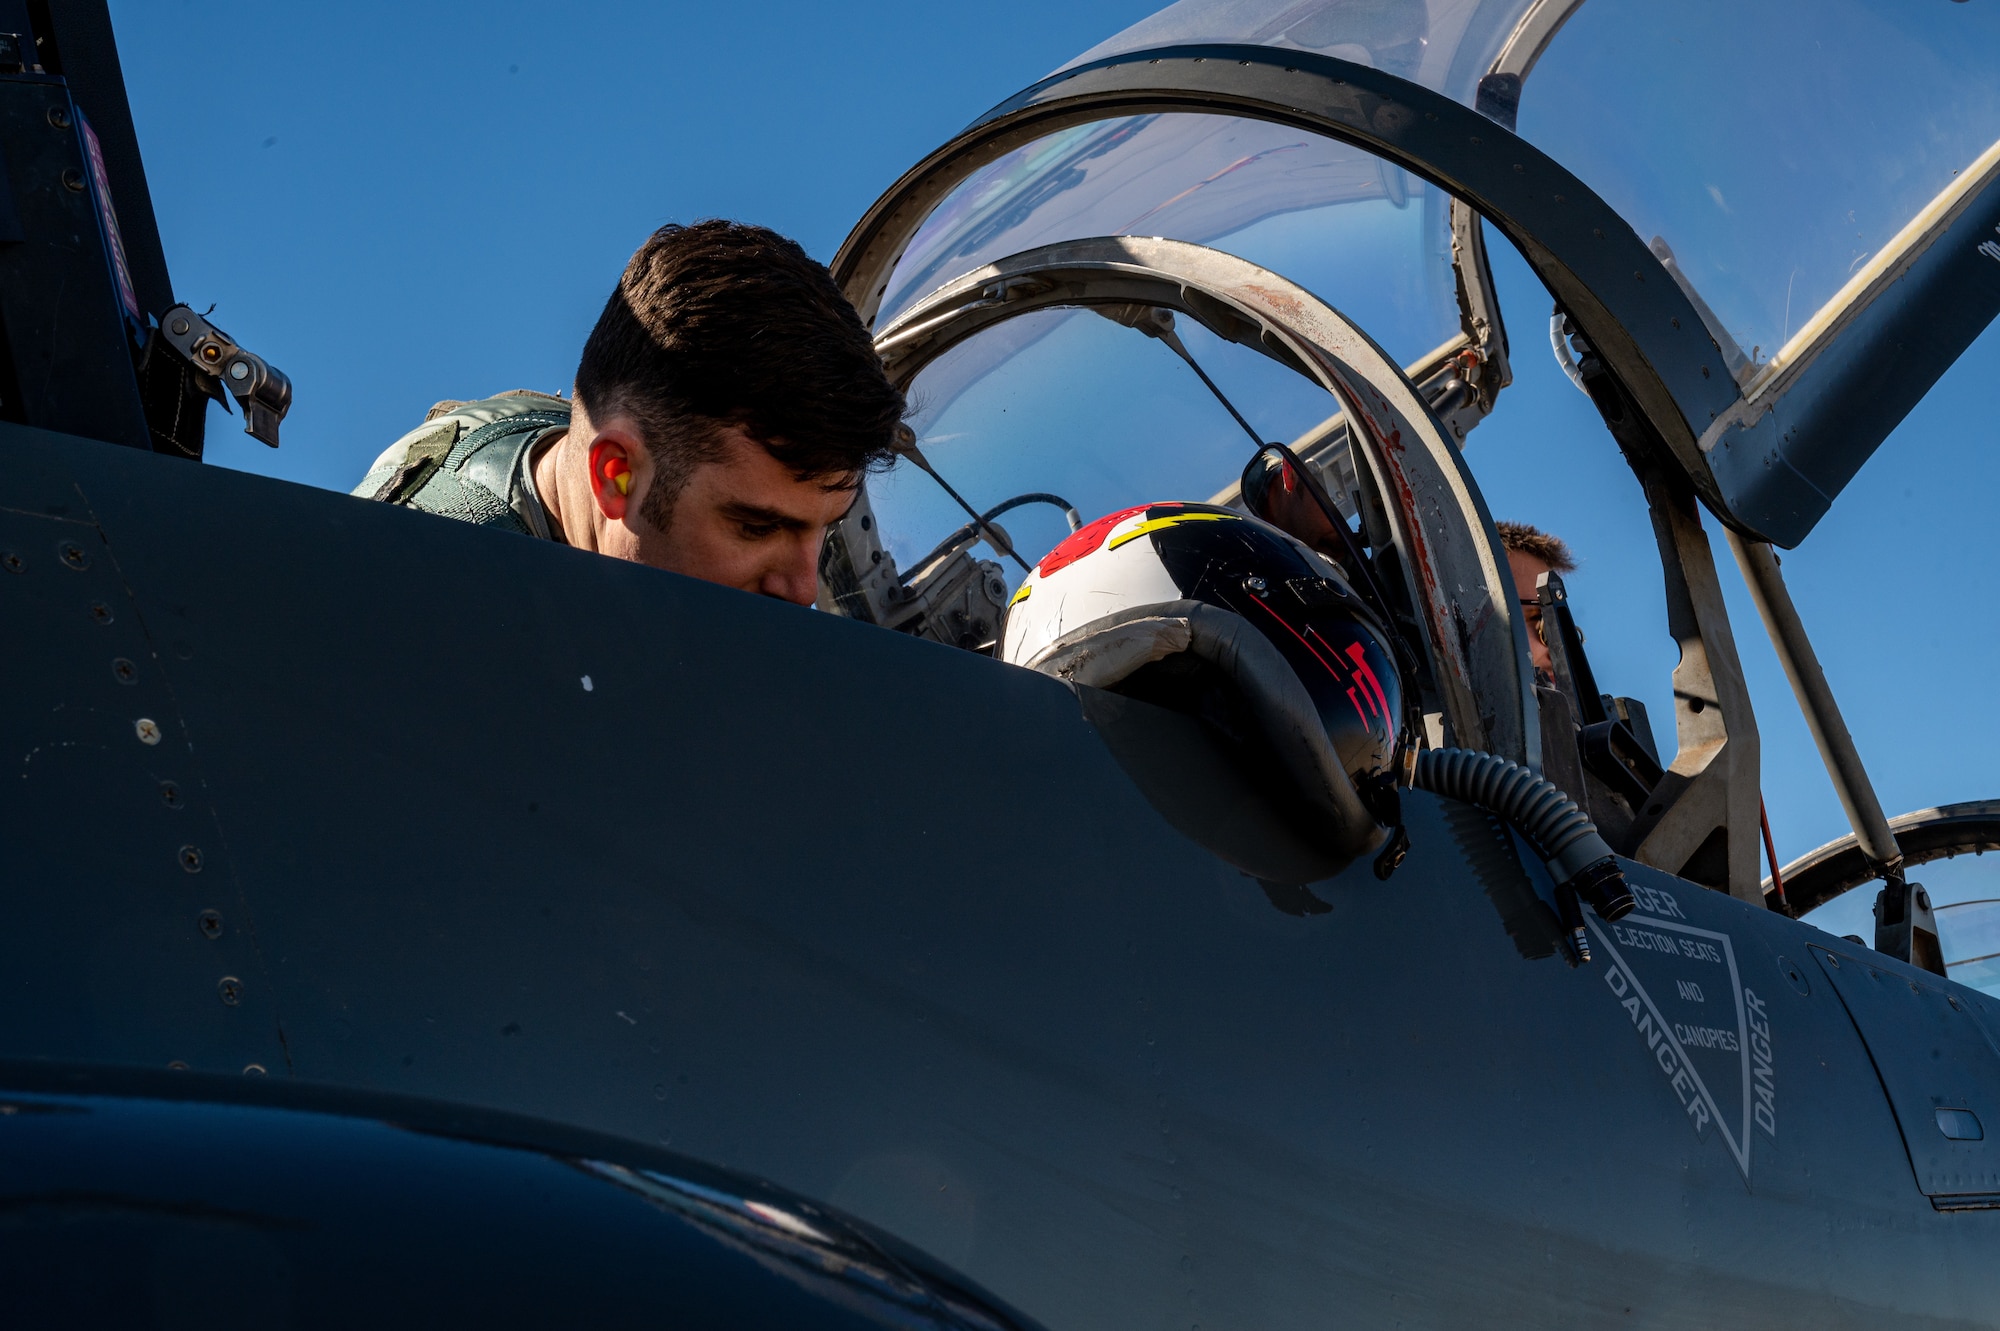 U.S. Air Force Capt. Garrett Green, 87th Flying Training Wing performs his pre-flight inspections before a standard cross country with students to hone their skills on Jan. 13, 2023, Laughlin Air Force Base, Texas. Cross country missions have students fly to different locations over the course of several days, to gain a large amount of flying time and test what they have learned. (U.S. Air Force photo by Senior Airman David Phaff)